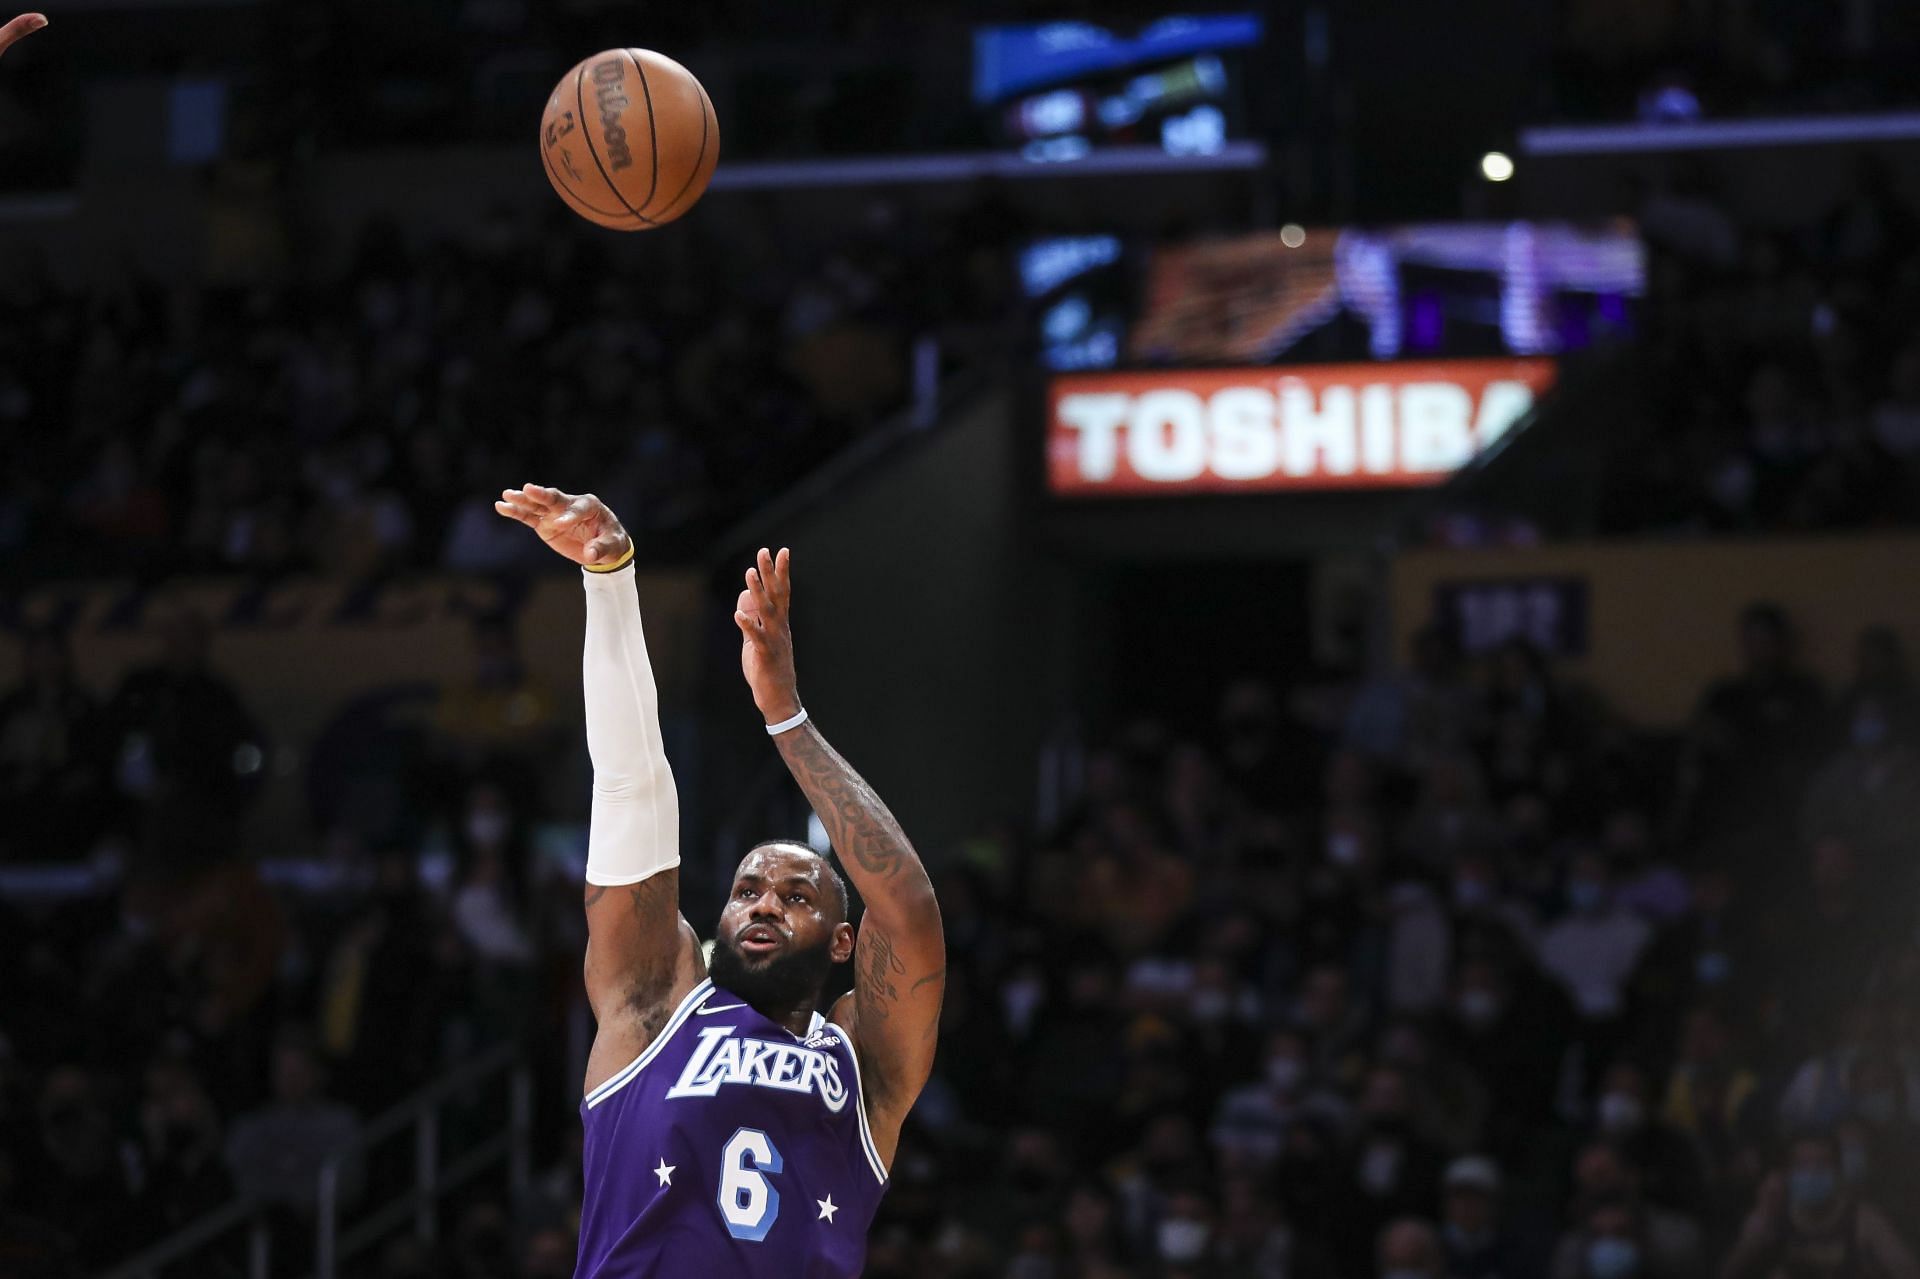 LeBron James scored 35 points in LA Lakers loss to Memphis Grizzlies.